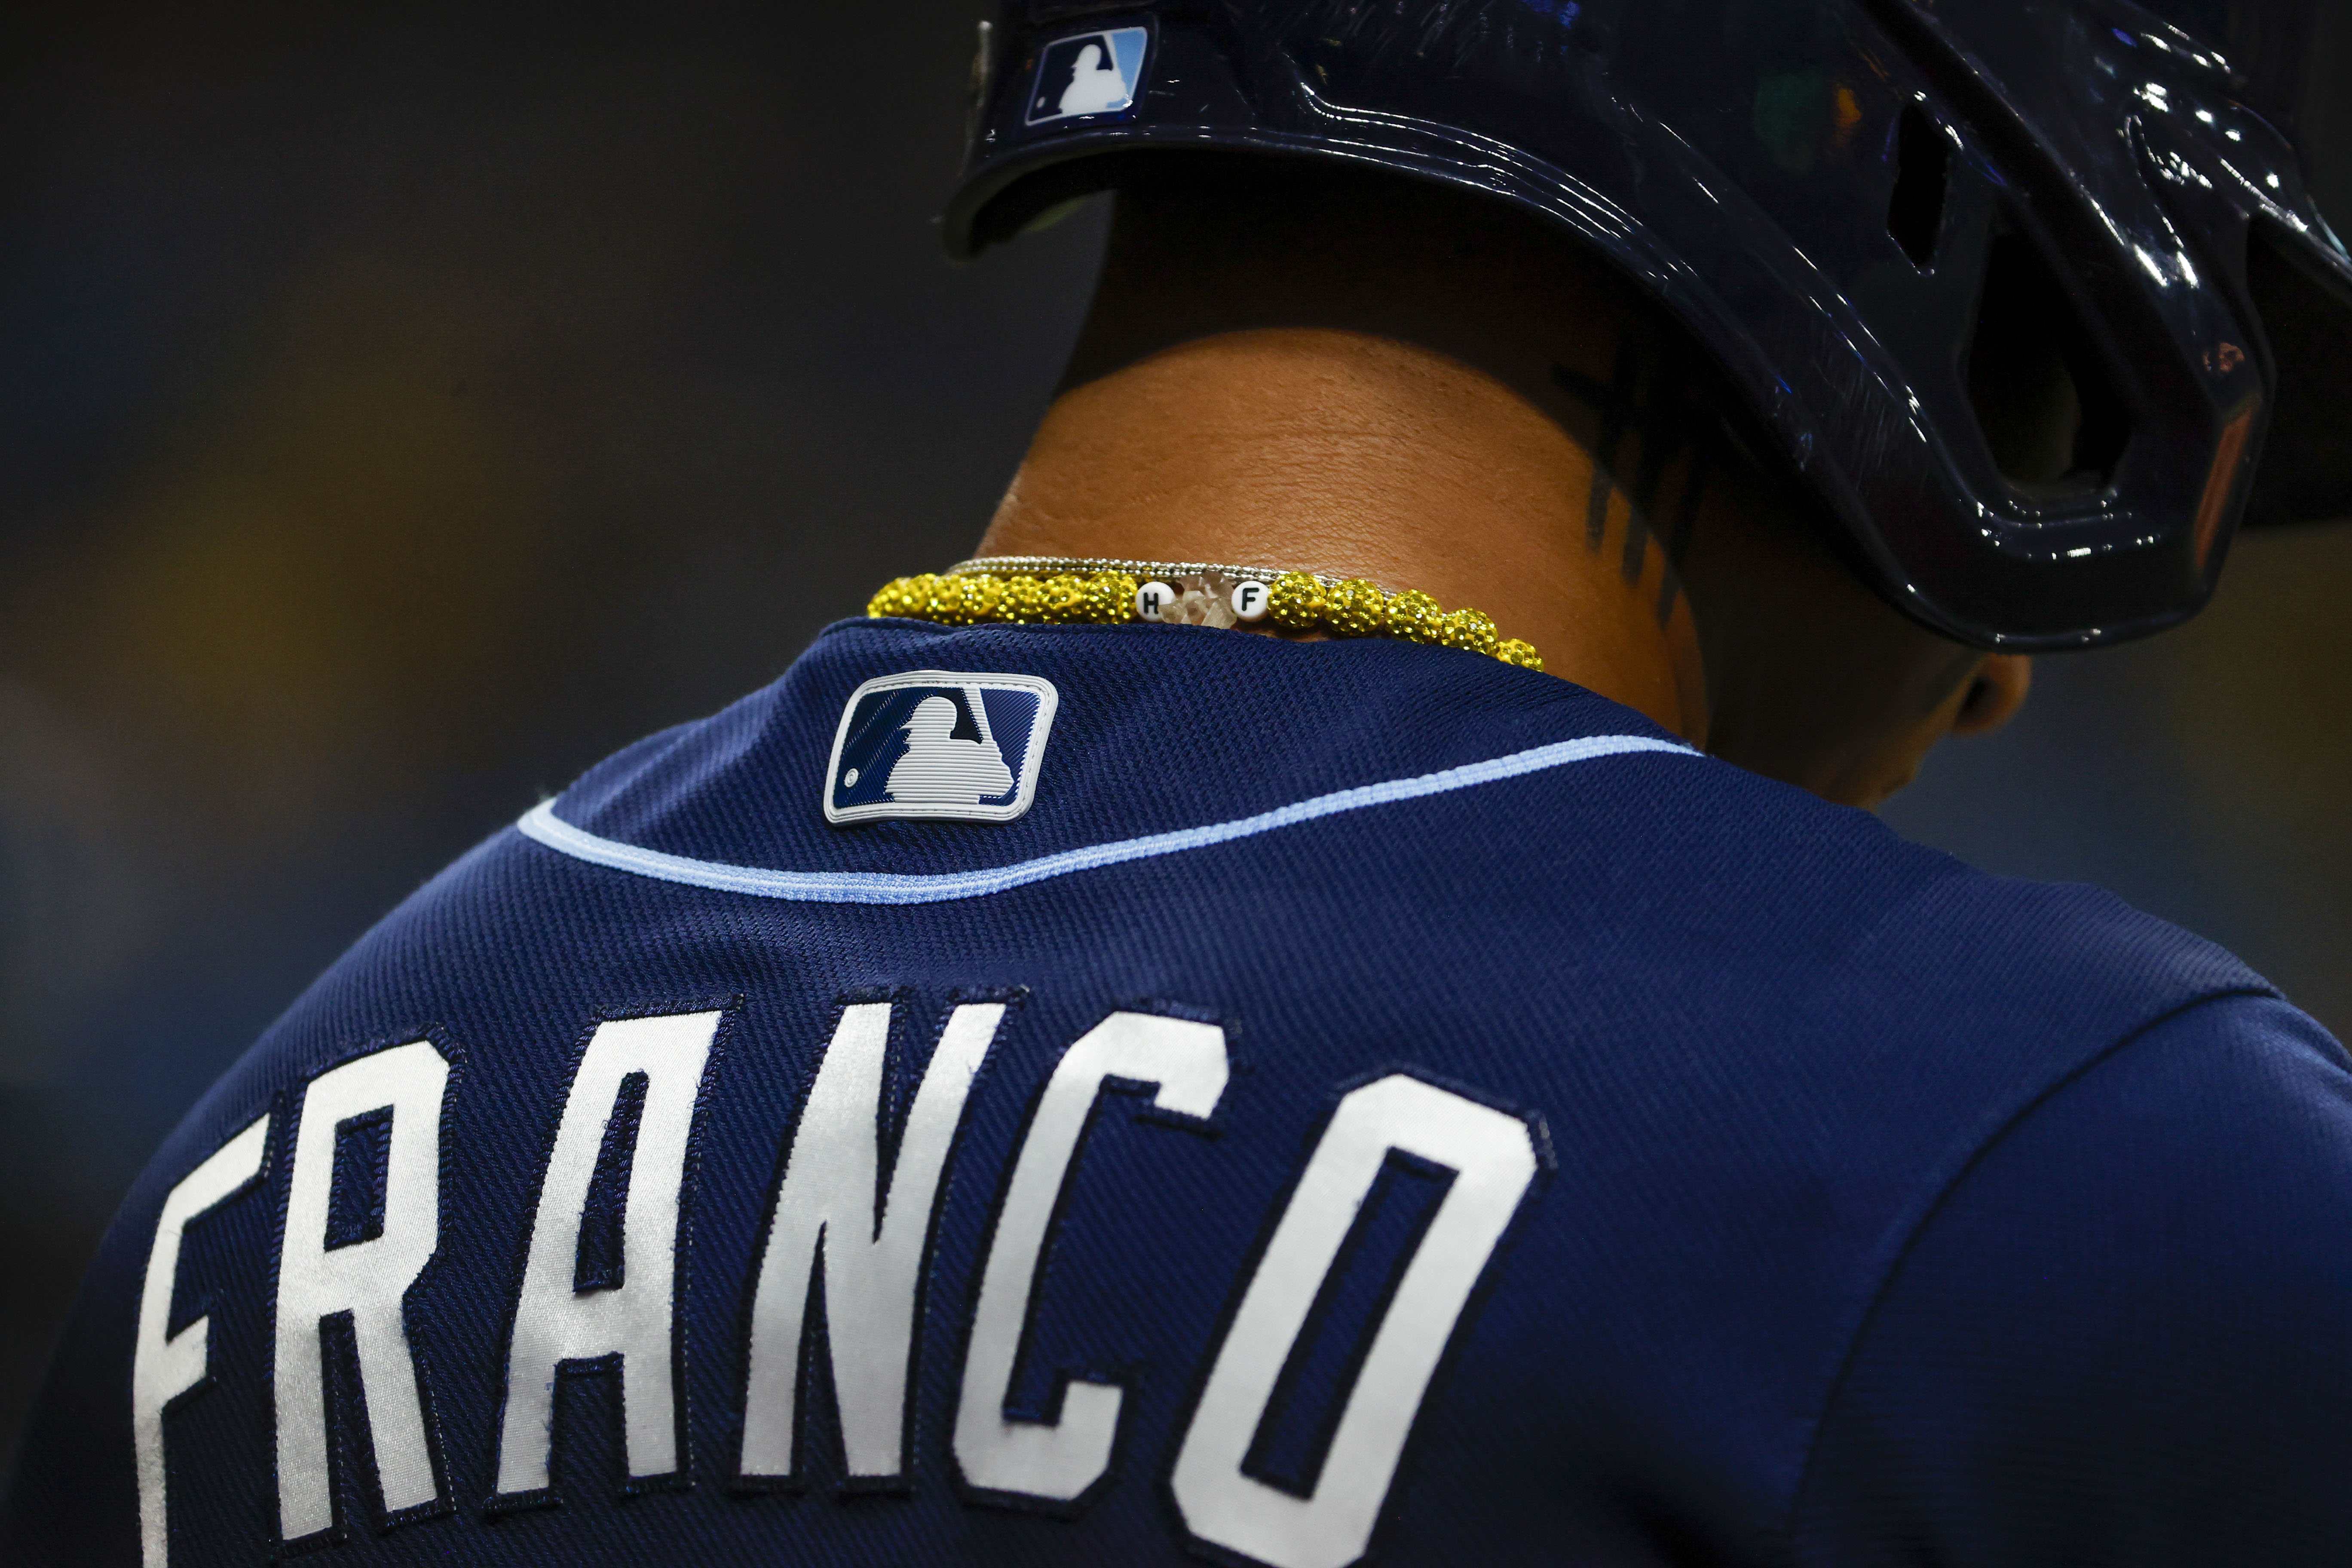 Wander Franco Reportedly 'Very Unlikely' To Play In MLB Again